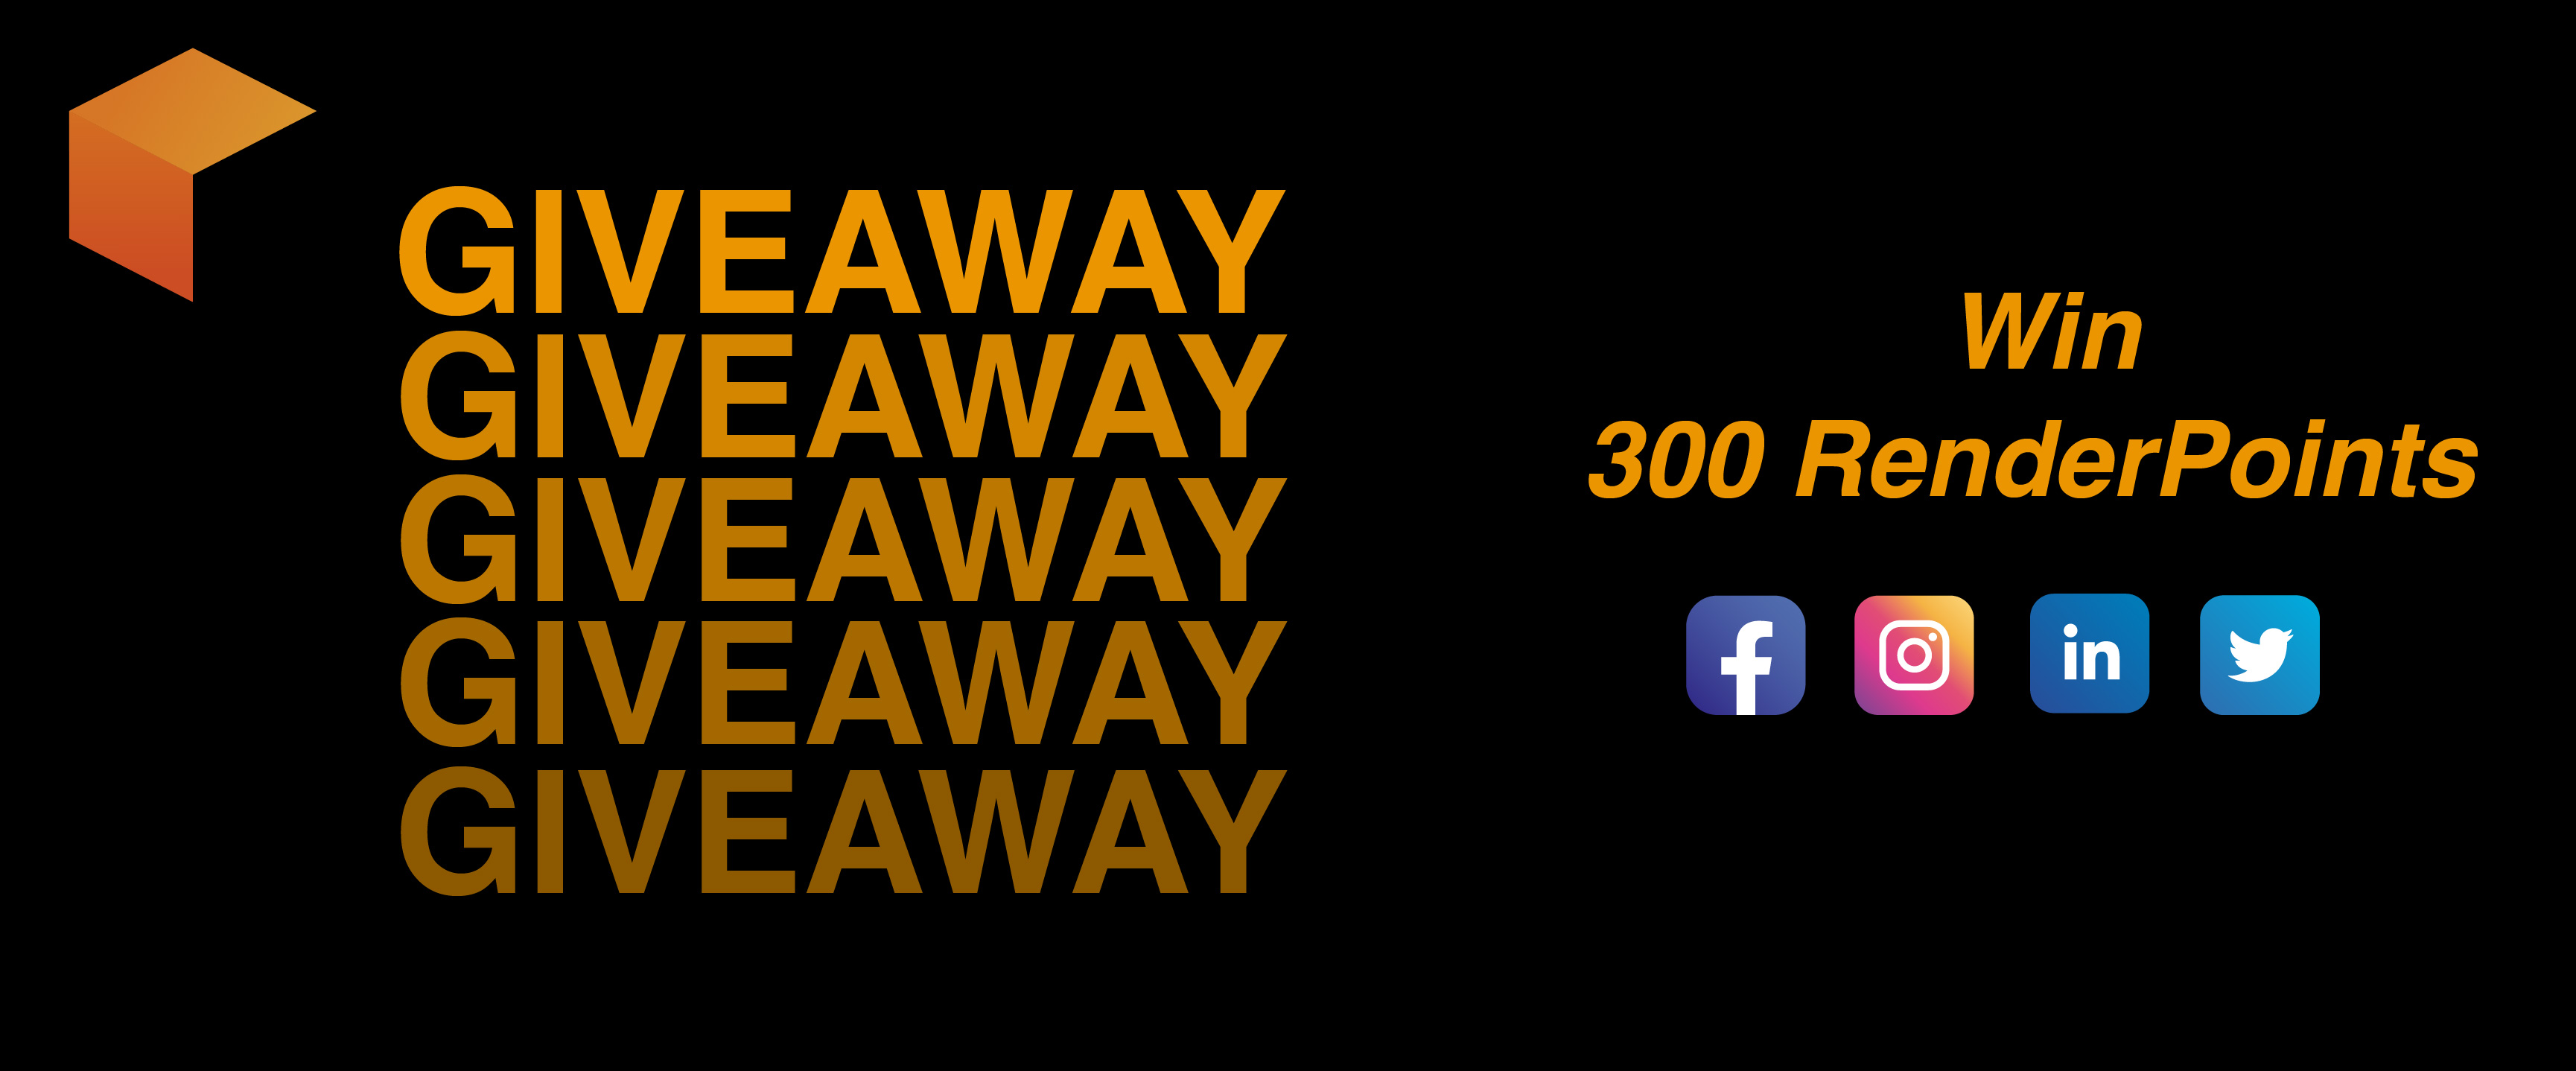 Giveaway - Win 300 RenderPoints 